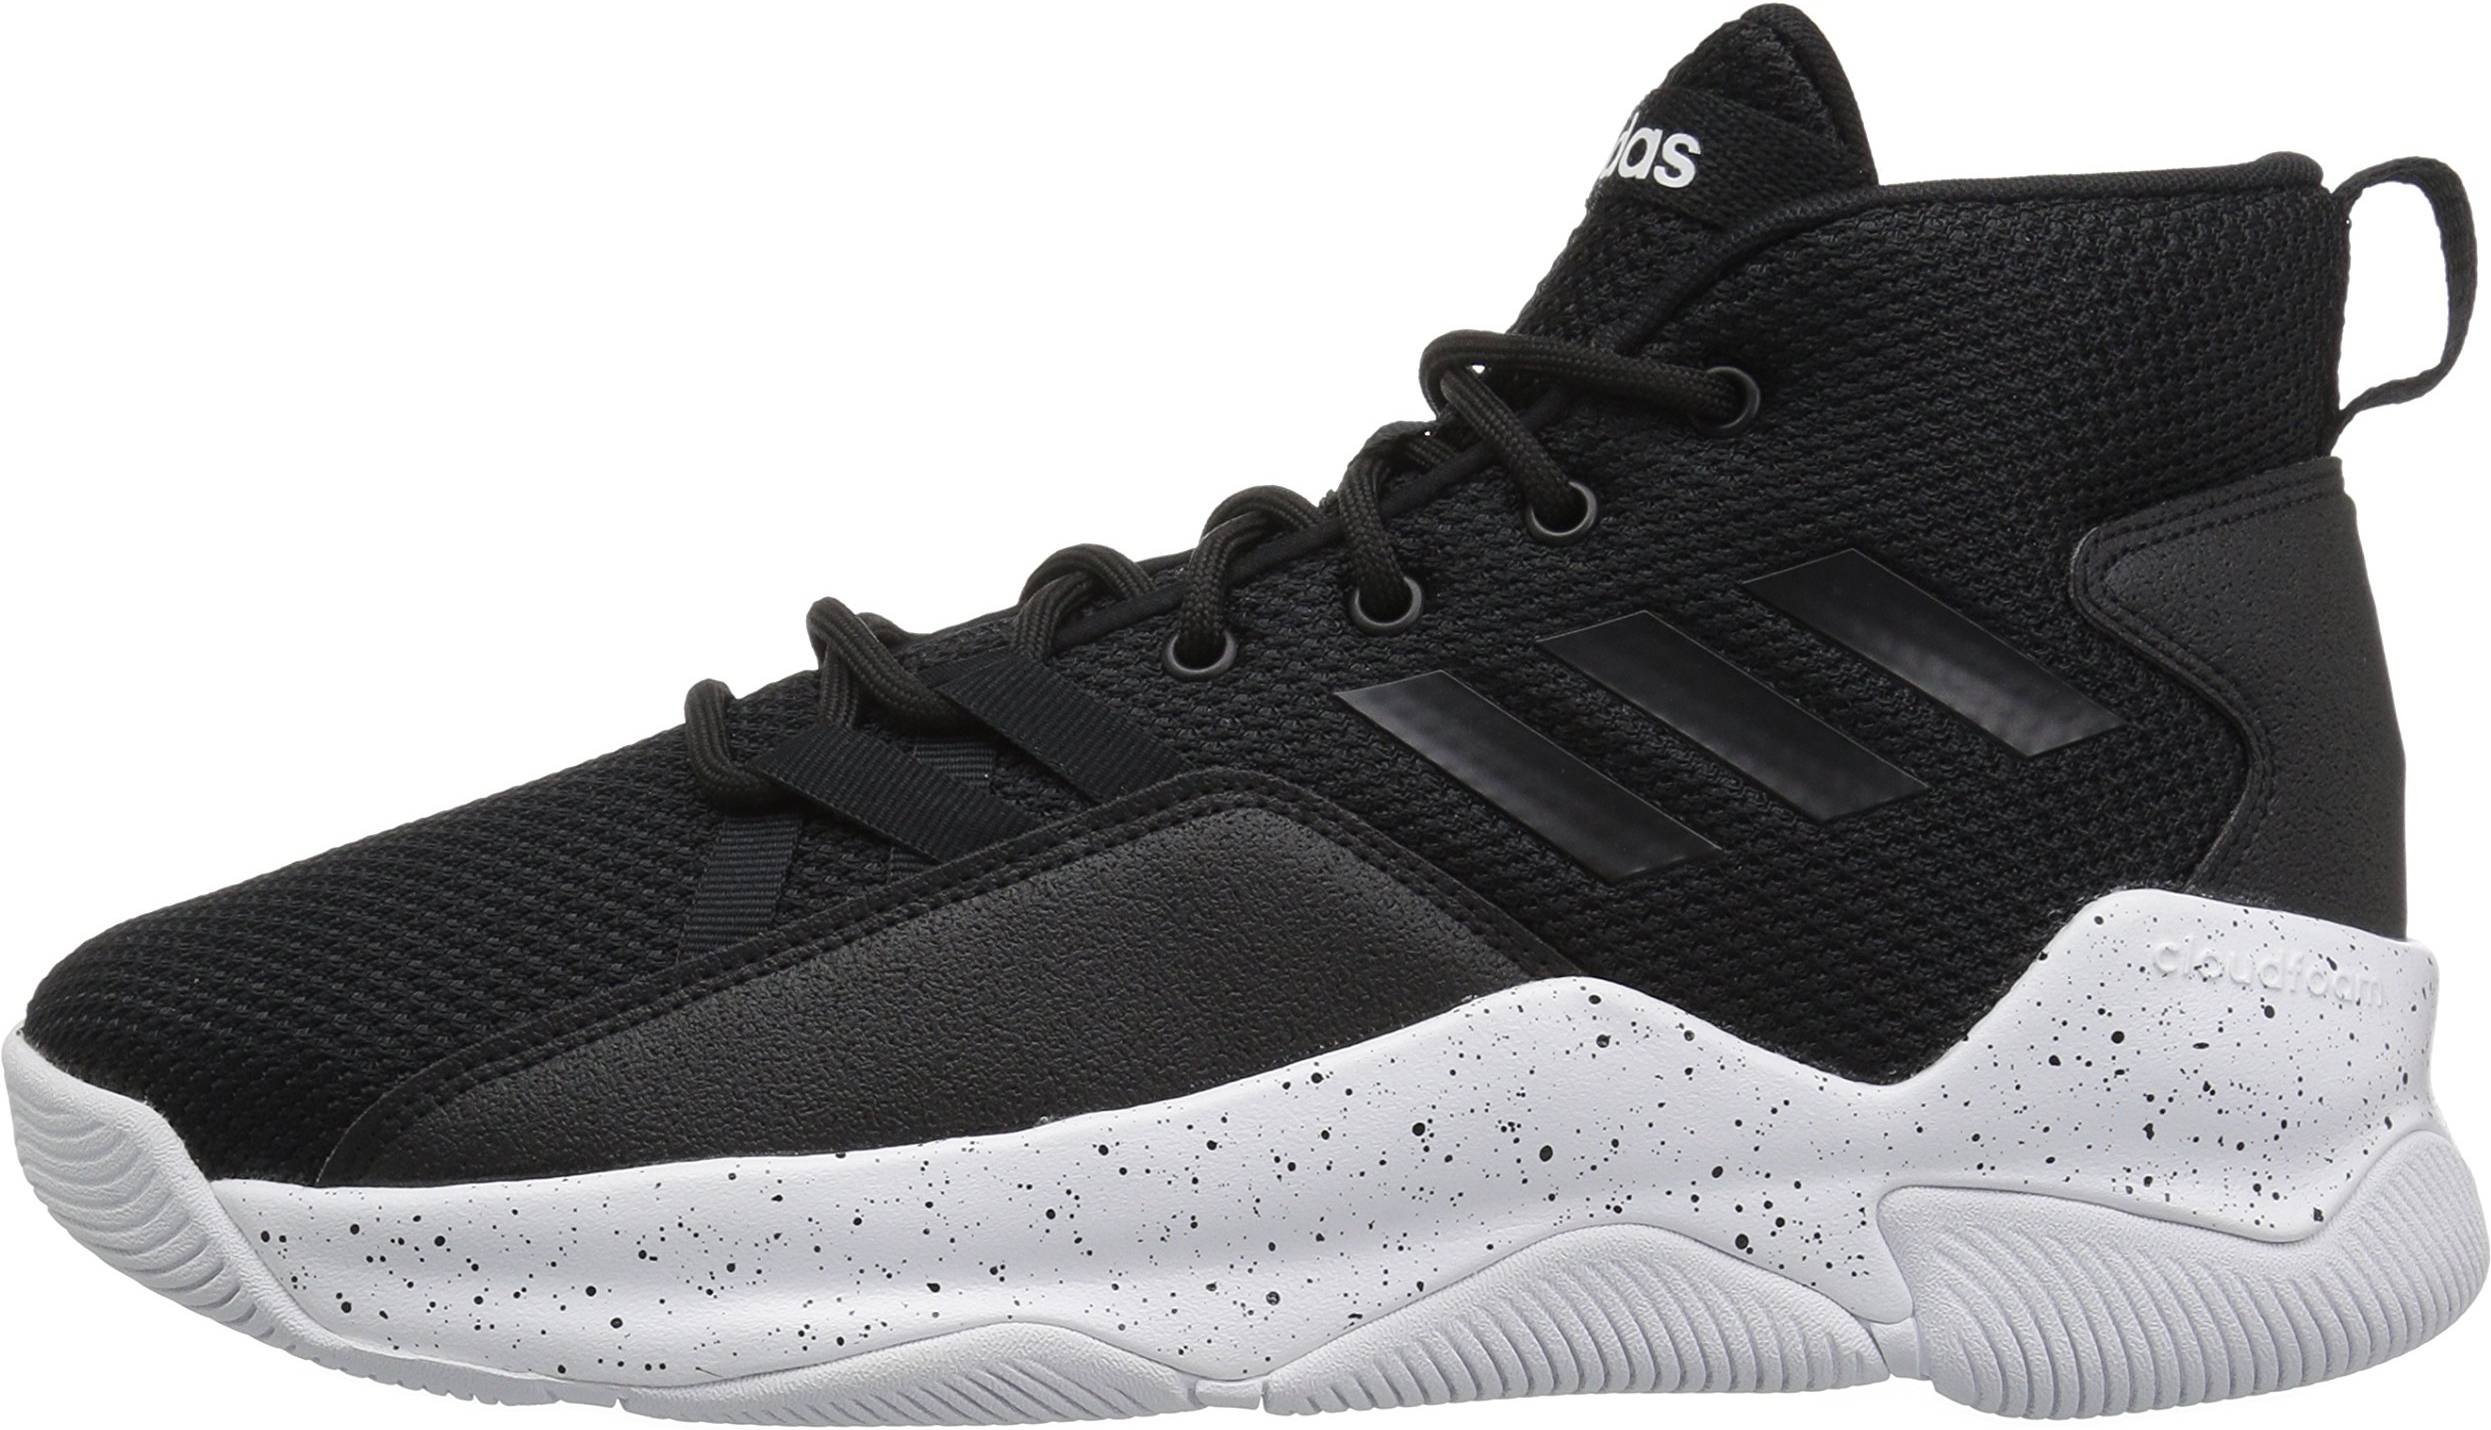 Only $51 + Review of Adidas Streetfire 